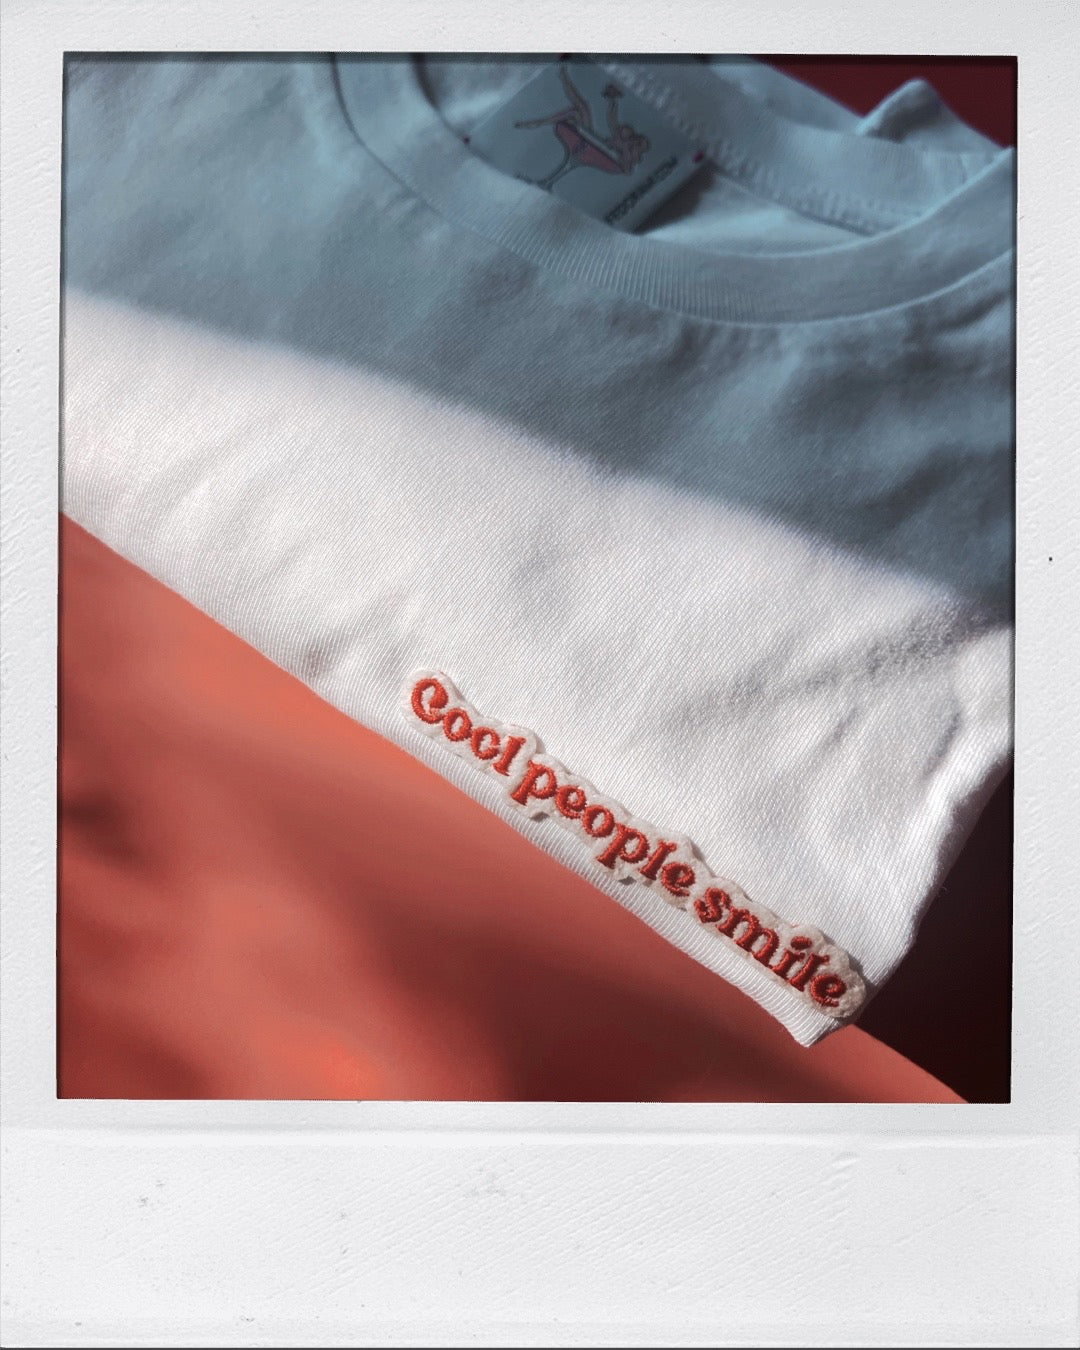 Cool people smile - tiny patch tee